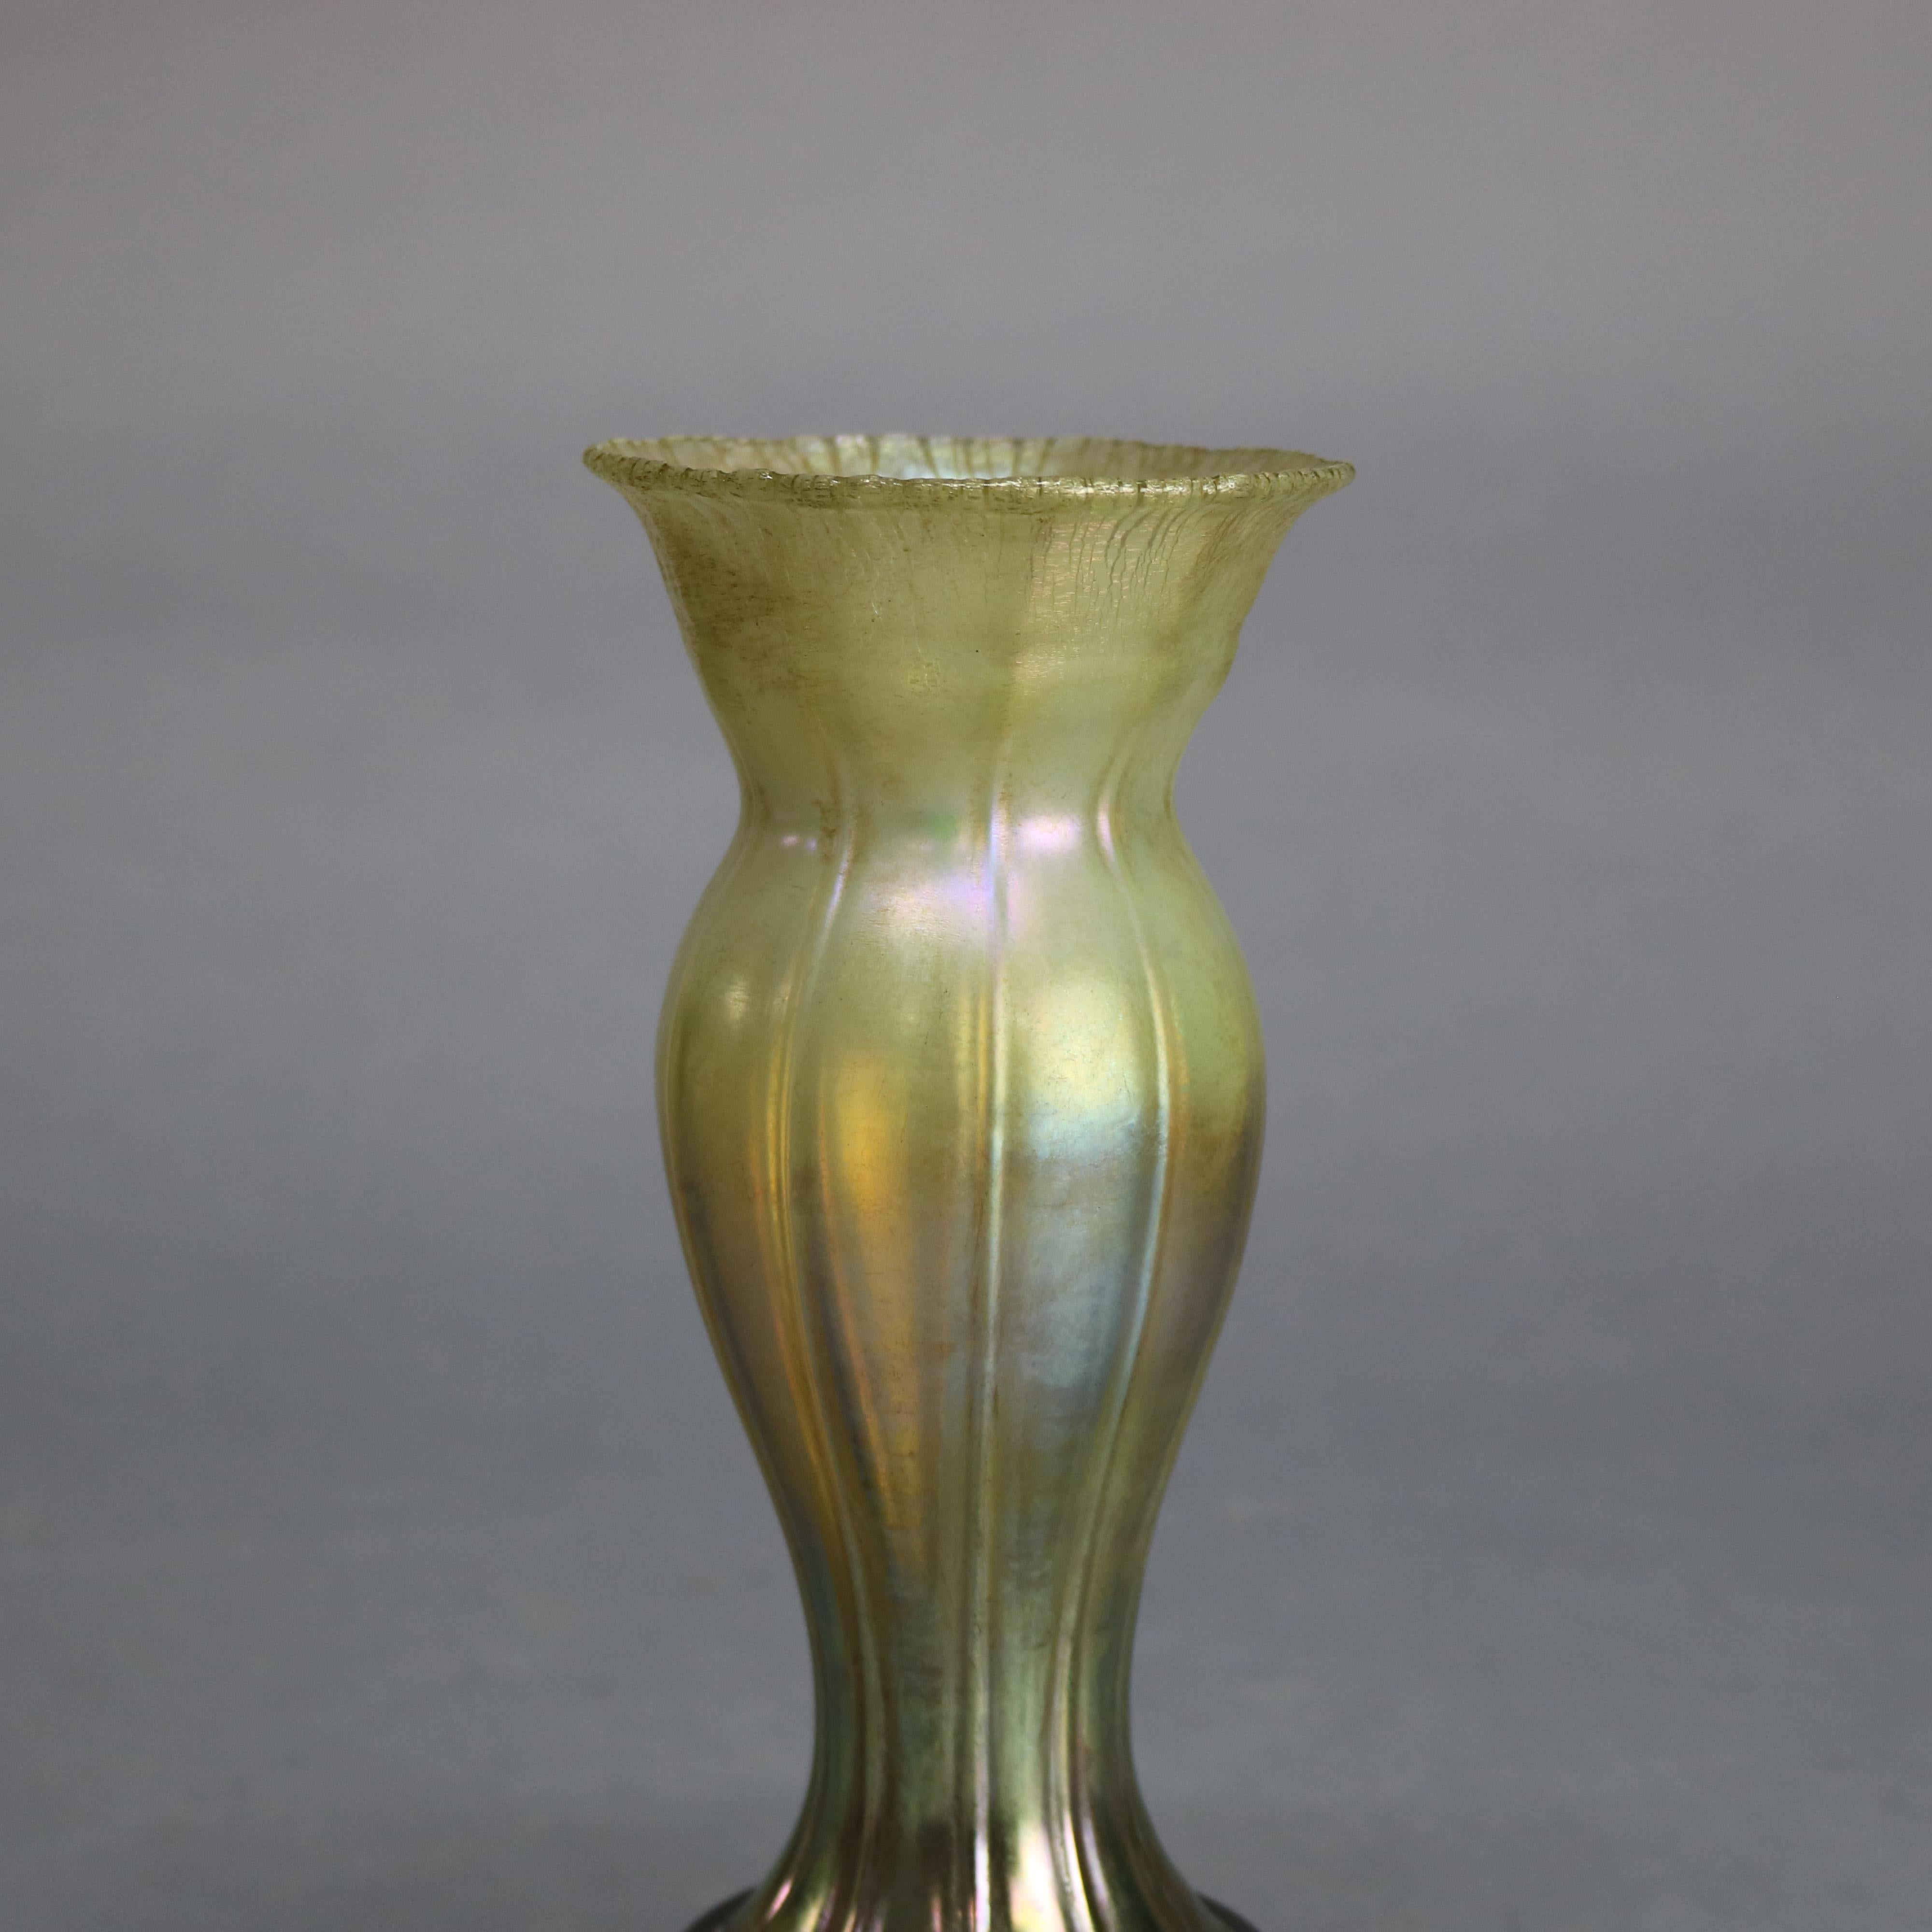 An antique vase by Tiffany Studios offers Favrile art glass silhouette form ribbed vessel seated on cast base with foliate elements, signed on base as photographed, circa 1920

Measures: 9.5